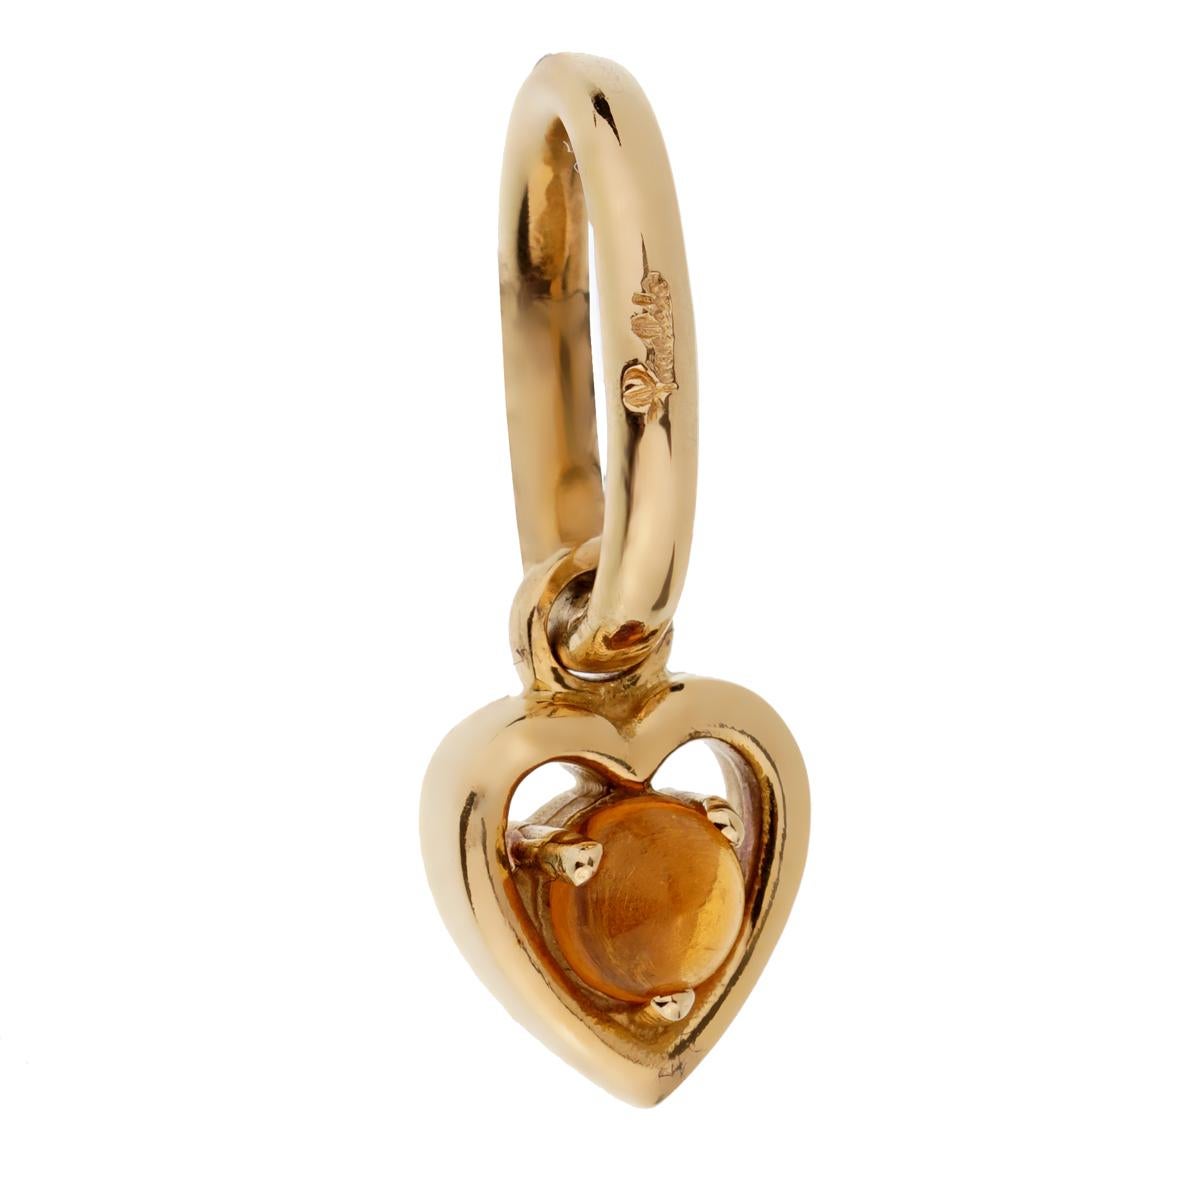 A chic brand new Pomellato charm pendant featuring a .30ct citrine set in 18k yellow gold. 

Sku: 2213